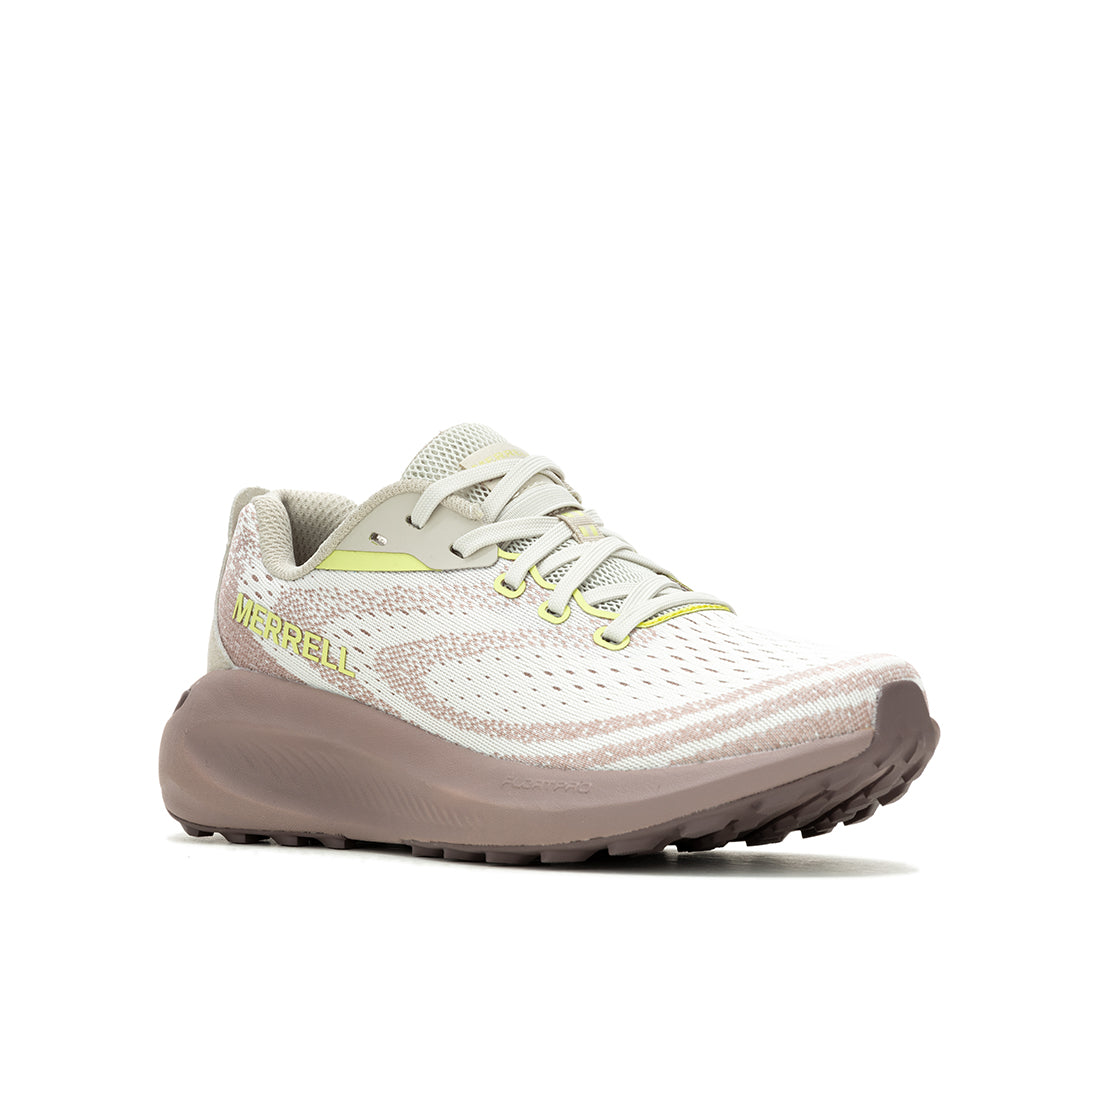 Morphlite – Parchment/Antler Womens Trail Running Shoes